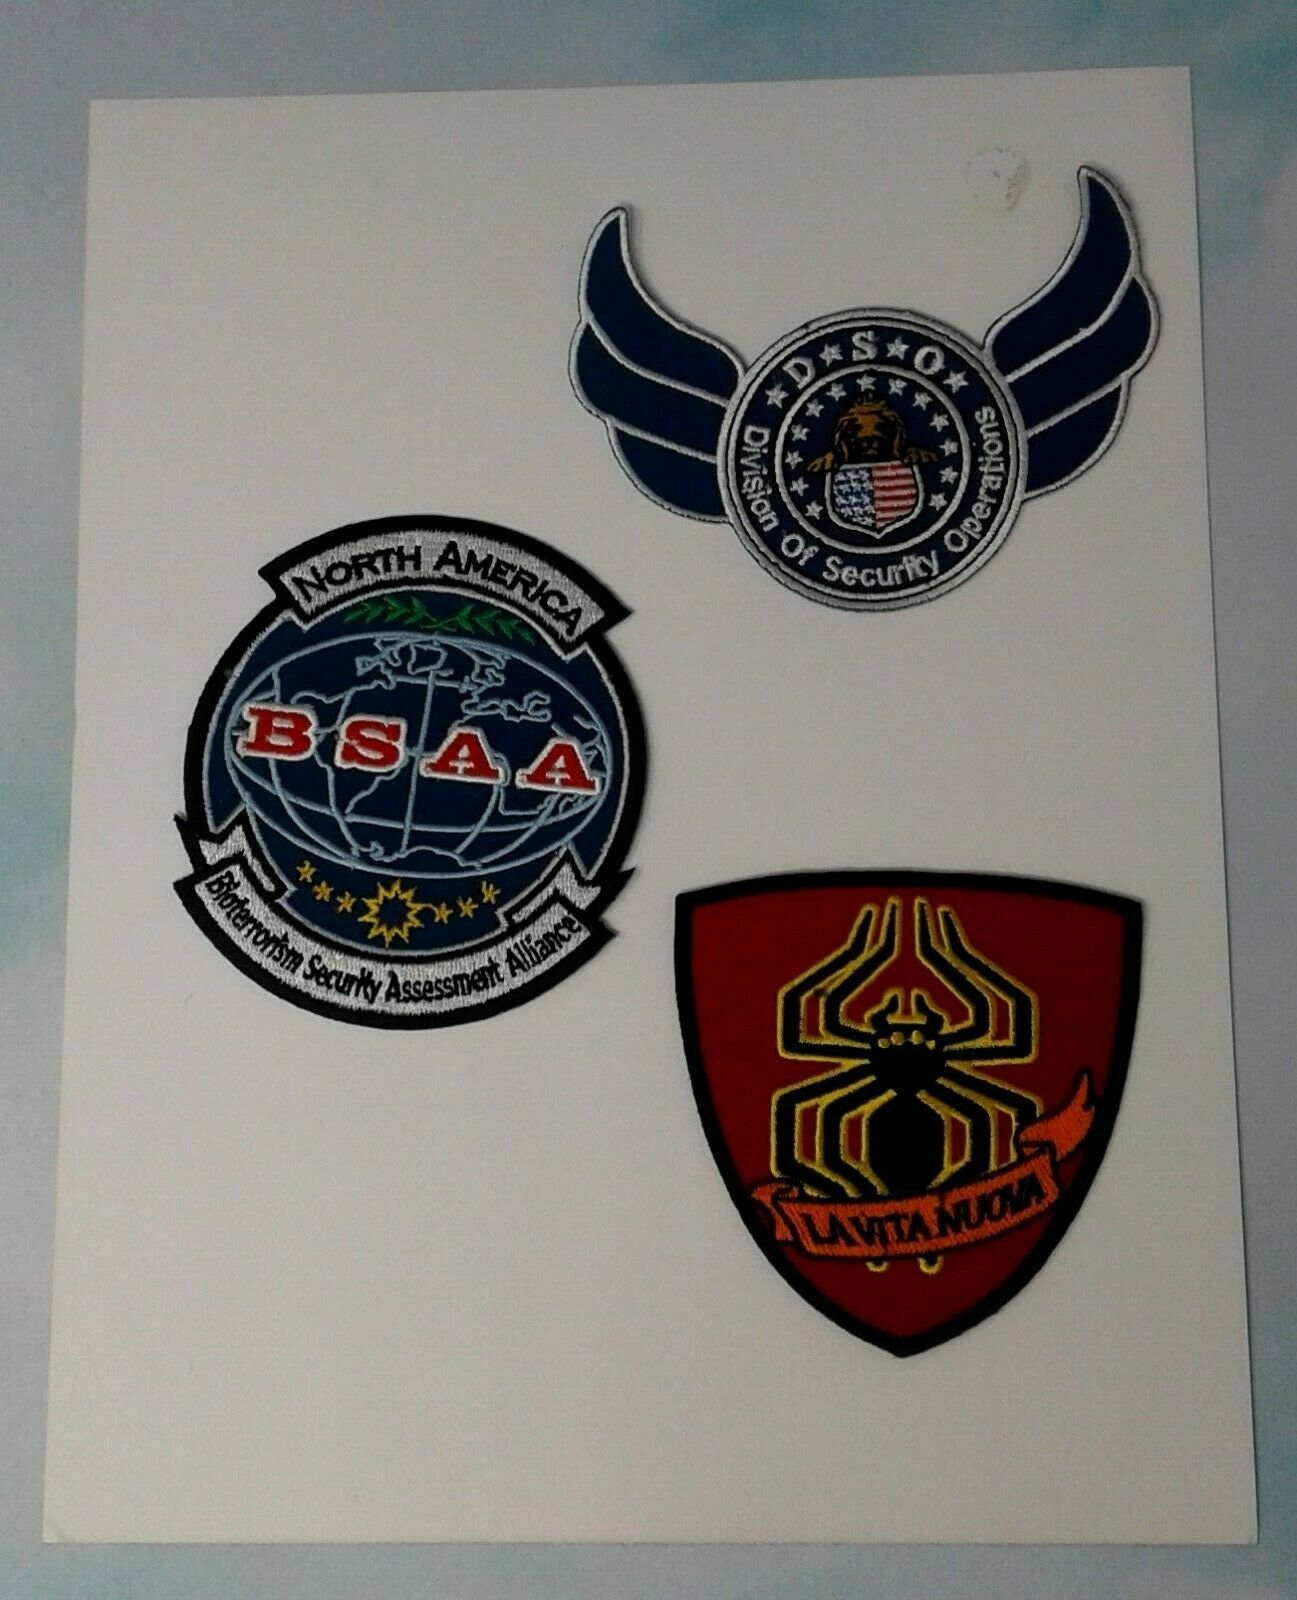 Resident Evil 5 Embroidered Patches From The Limited Edition Guide